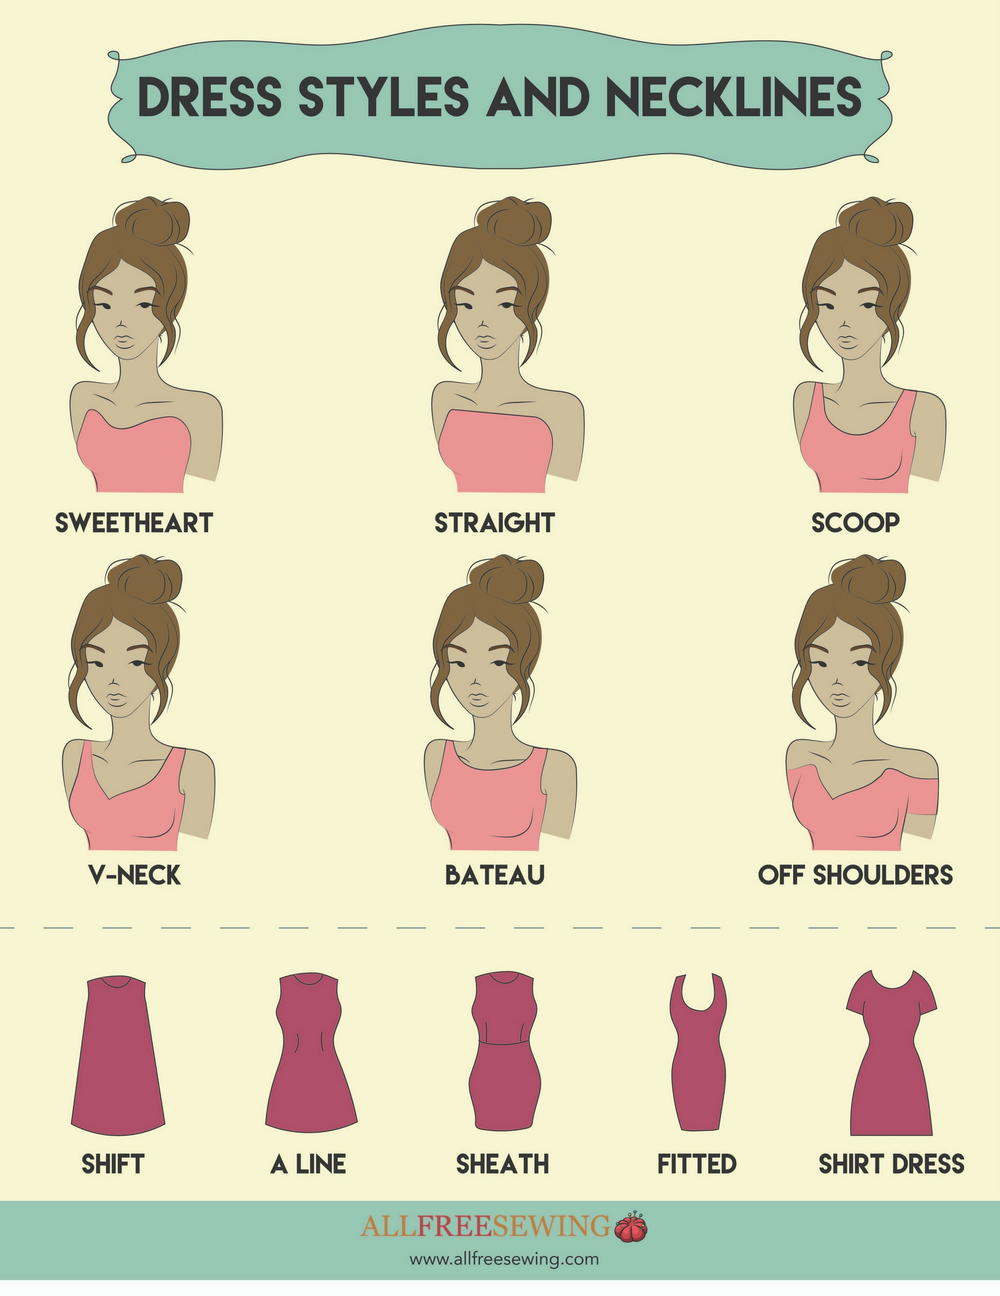 Dress Styles and Necklines Guide | AllFreeSewing.com